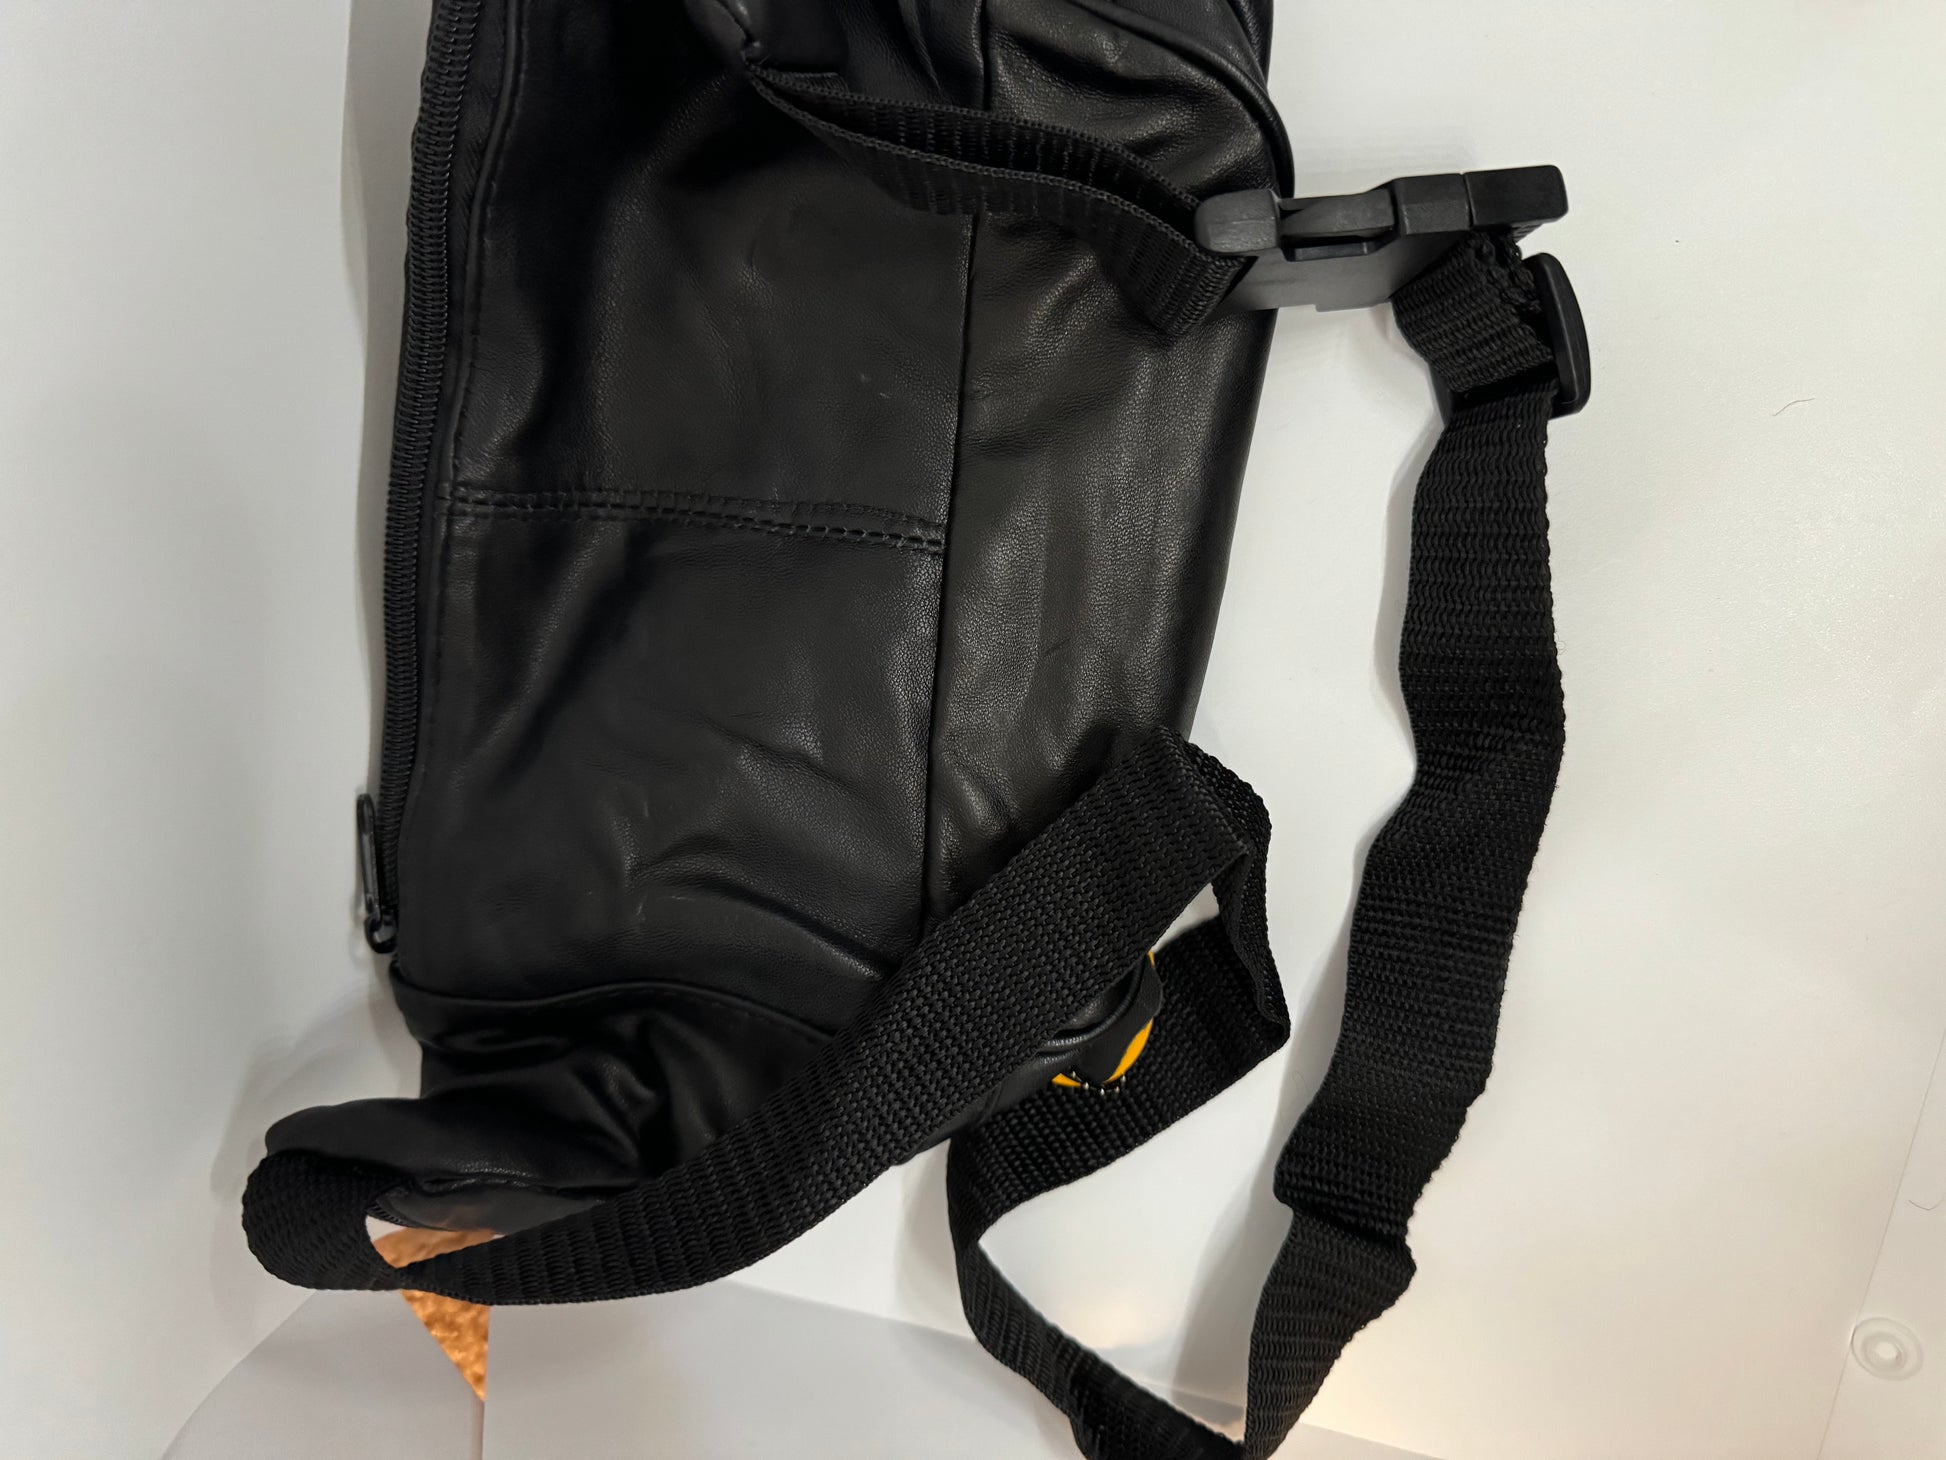 The picture shows a black bag, possibly made of leather or a similar material. The bag has a zipper on the side. There is also a black strap attached to the bag with a plastic buckle. The strap is made of a woven material and looks sturdy. The bag is placed on a white surface.